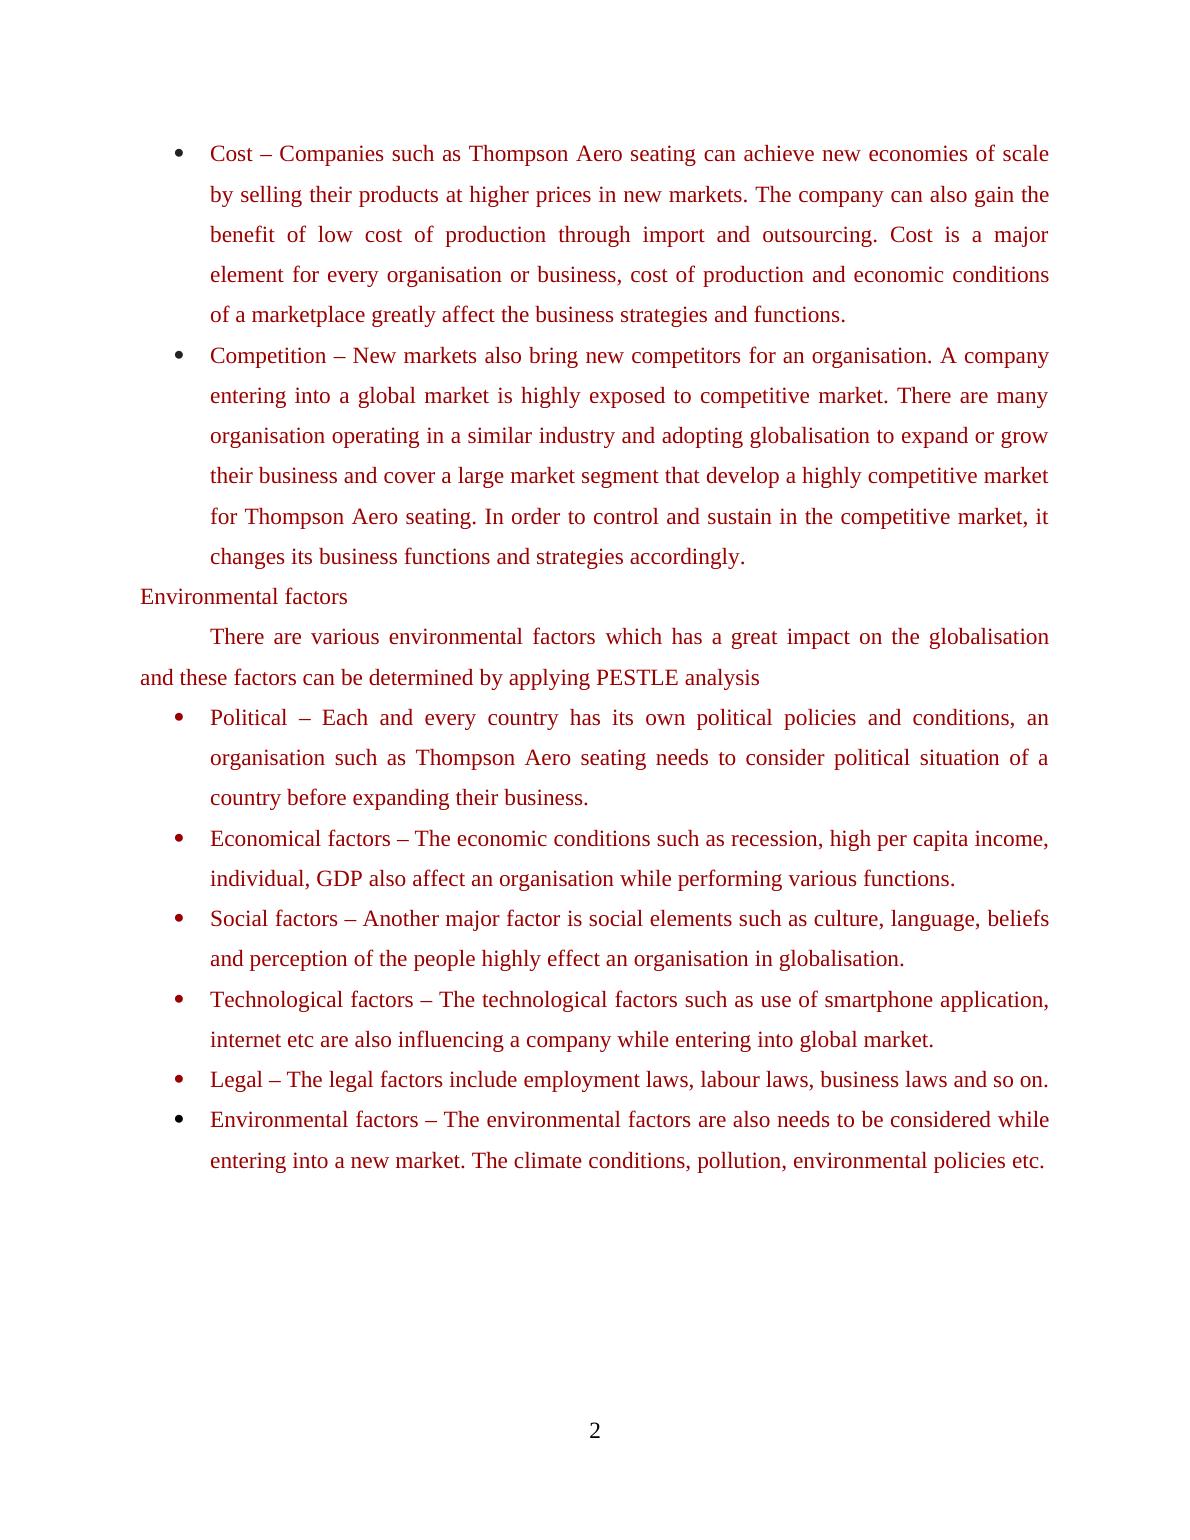 Drivers and Challenges for Globalisation Essay_4